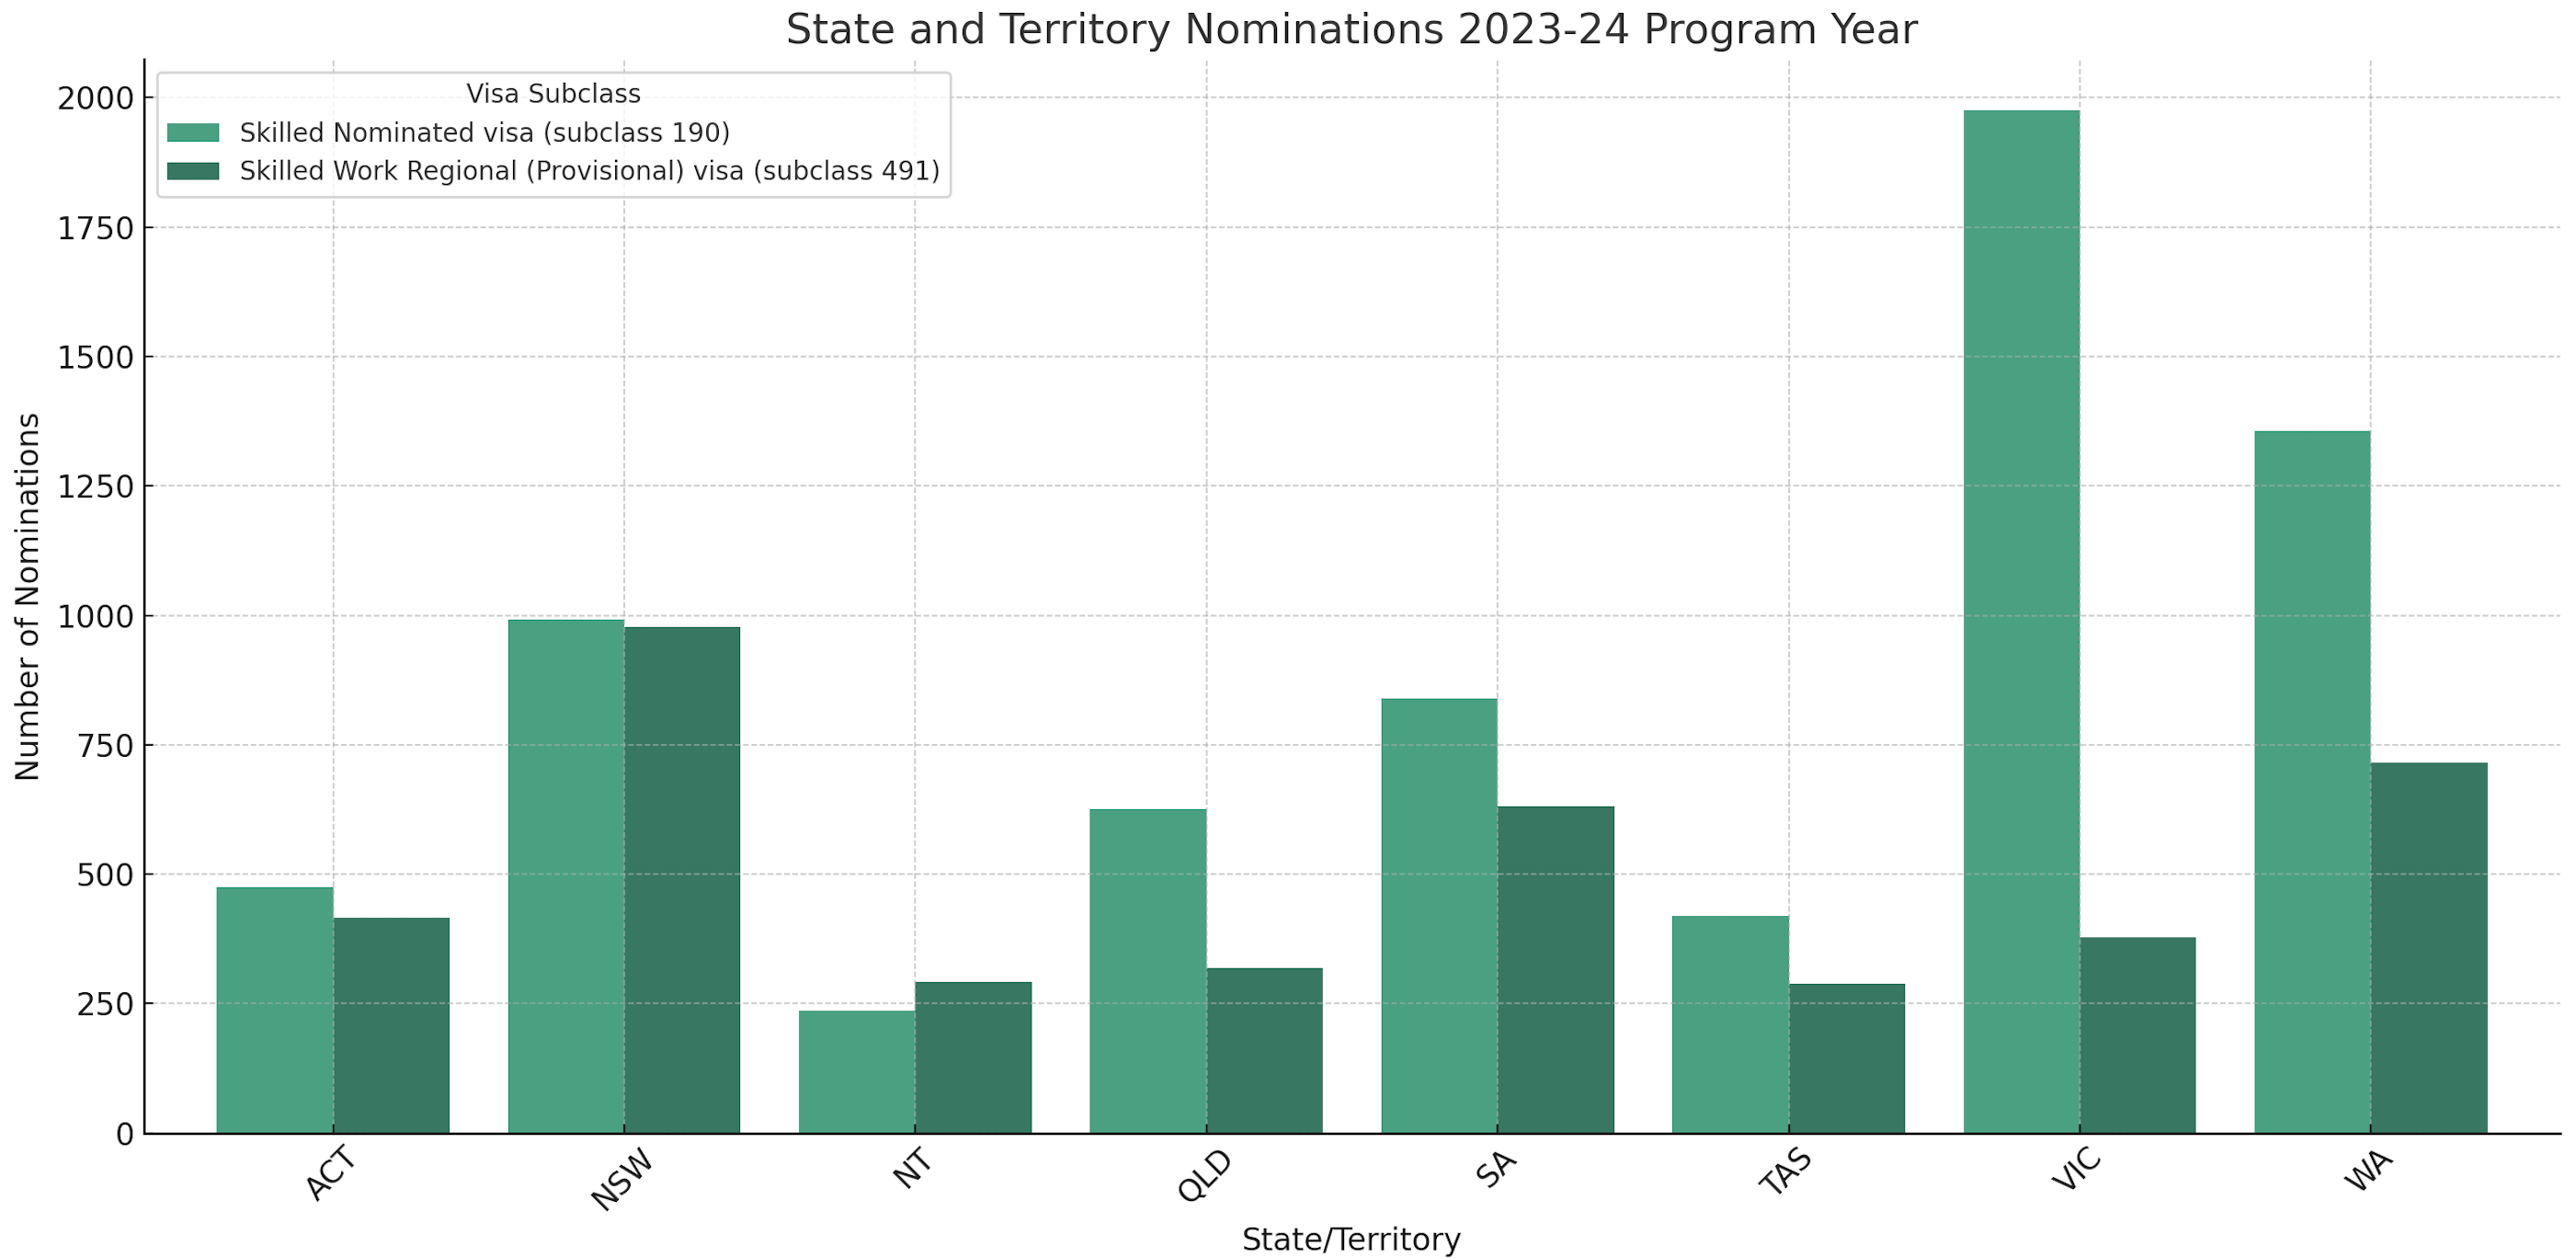 Analysing Australia's State and Territory Nominations for the 2023-24 Program Year